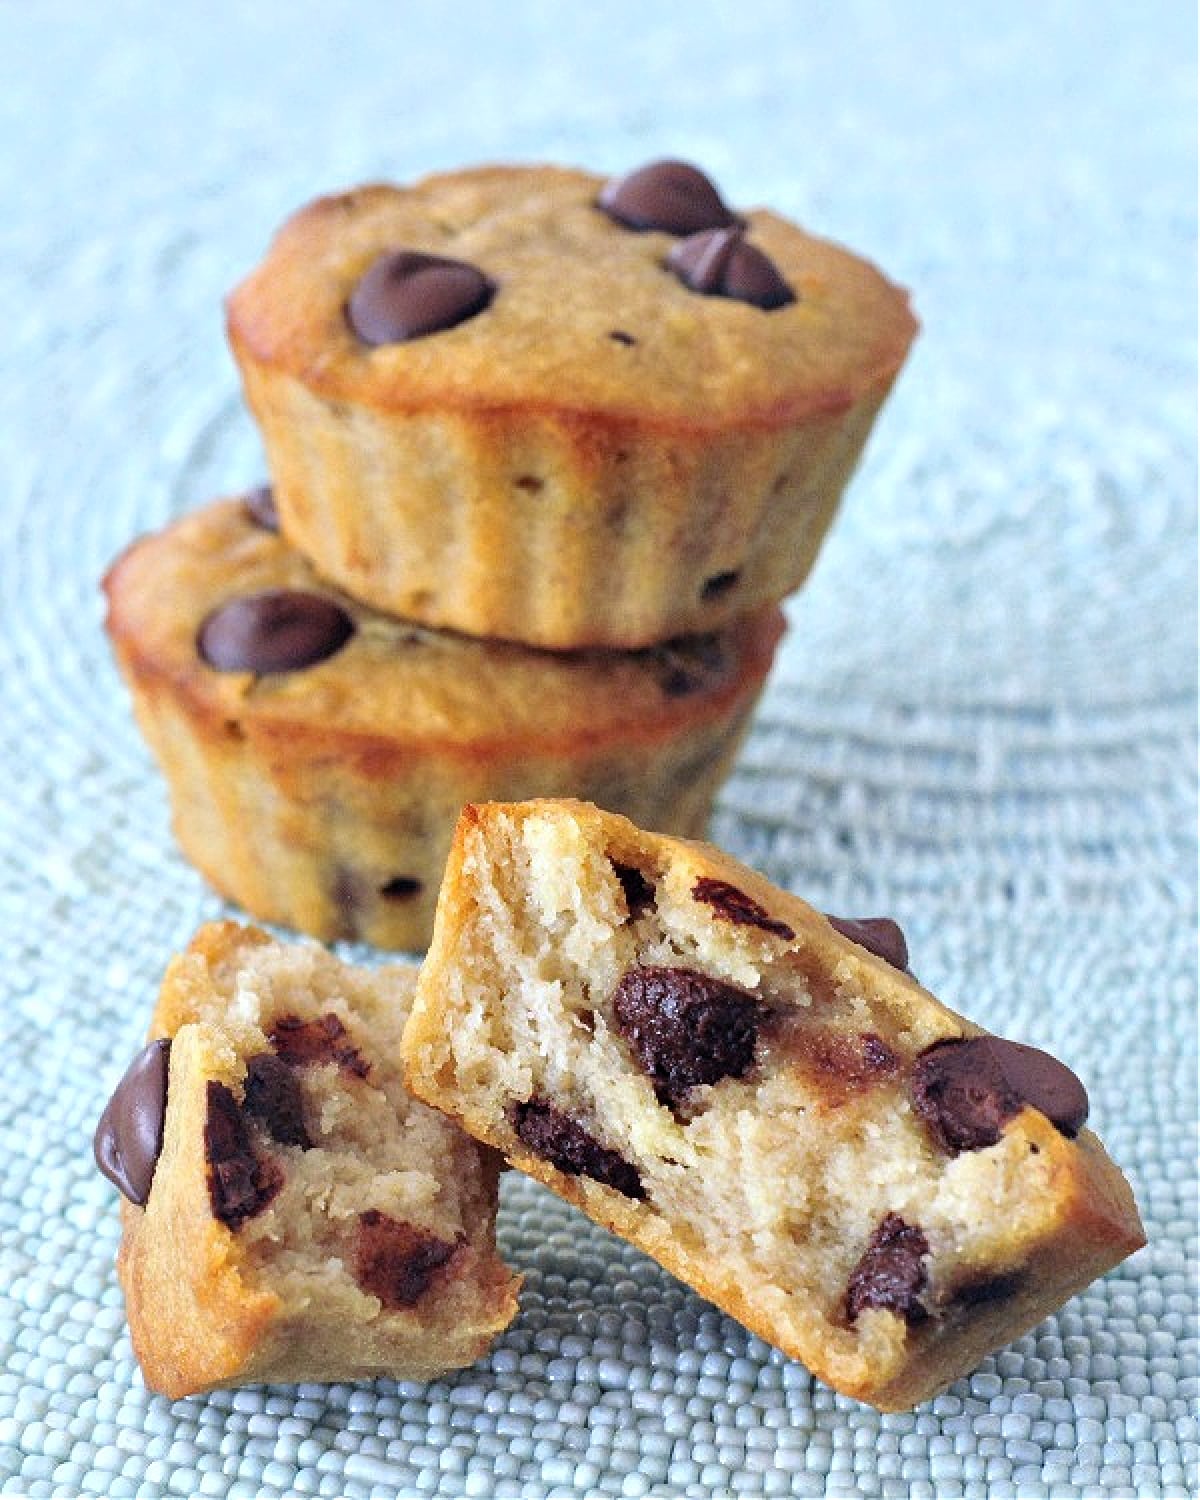 Three peanut butter chocolate chip muffins, one stacked on another, and one cut in half to show crumb inside.